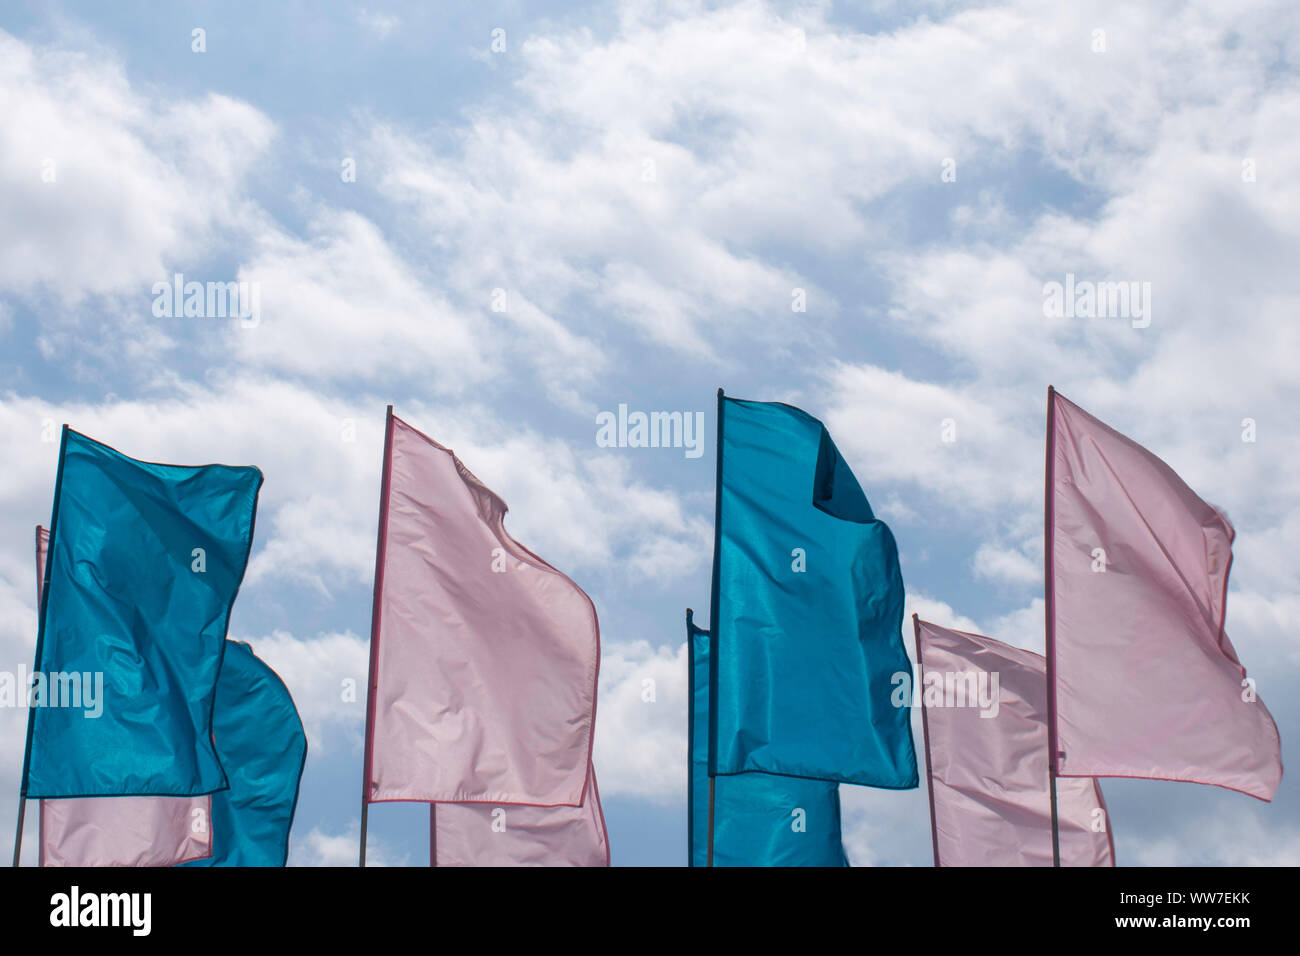 Pink and blue flags blowing in the wind against a blue cloudy sky suggesting the concept of male, female and cisgender. Stock Photo